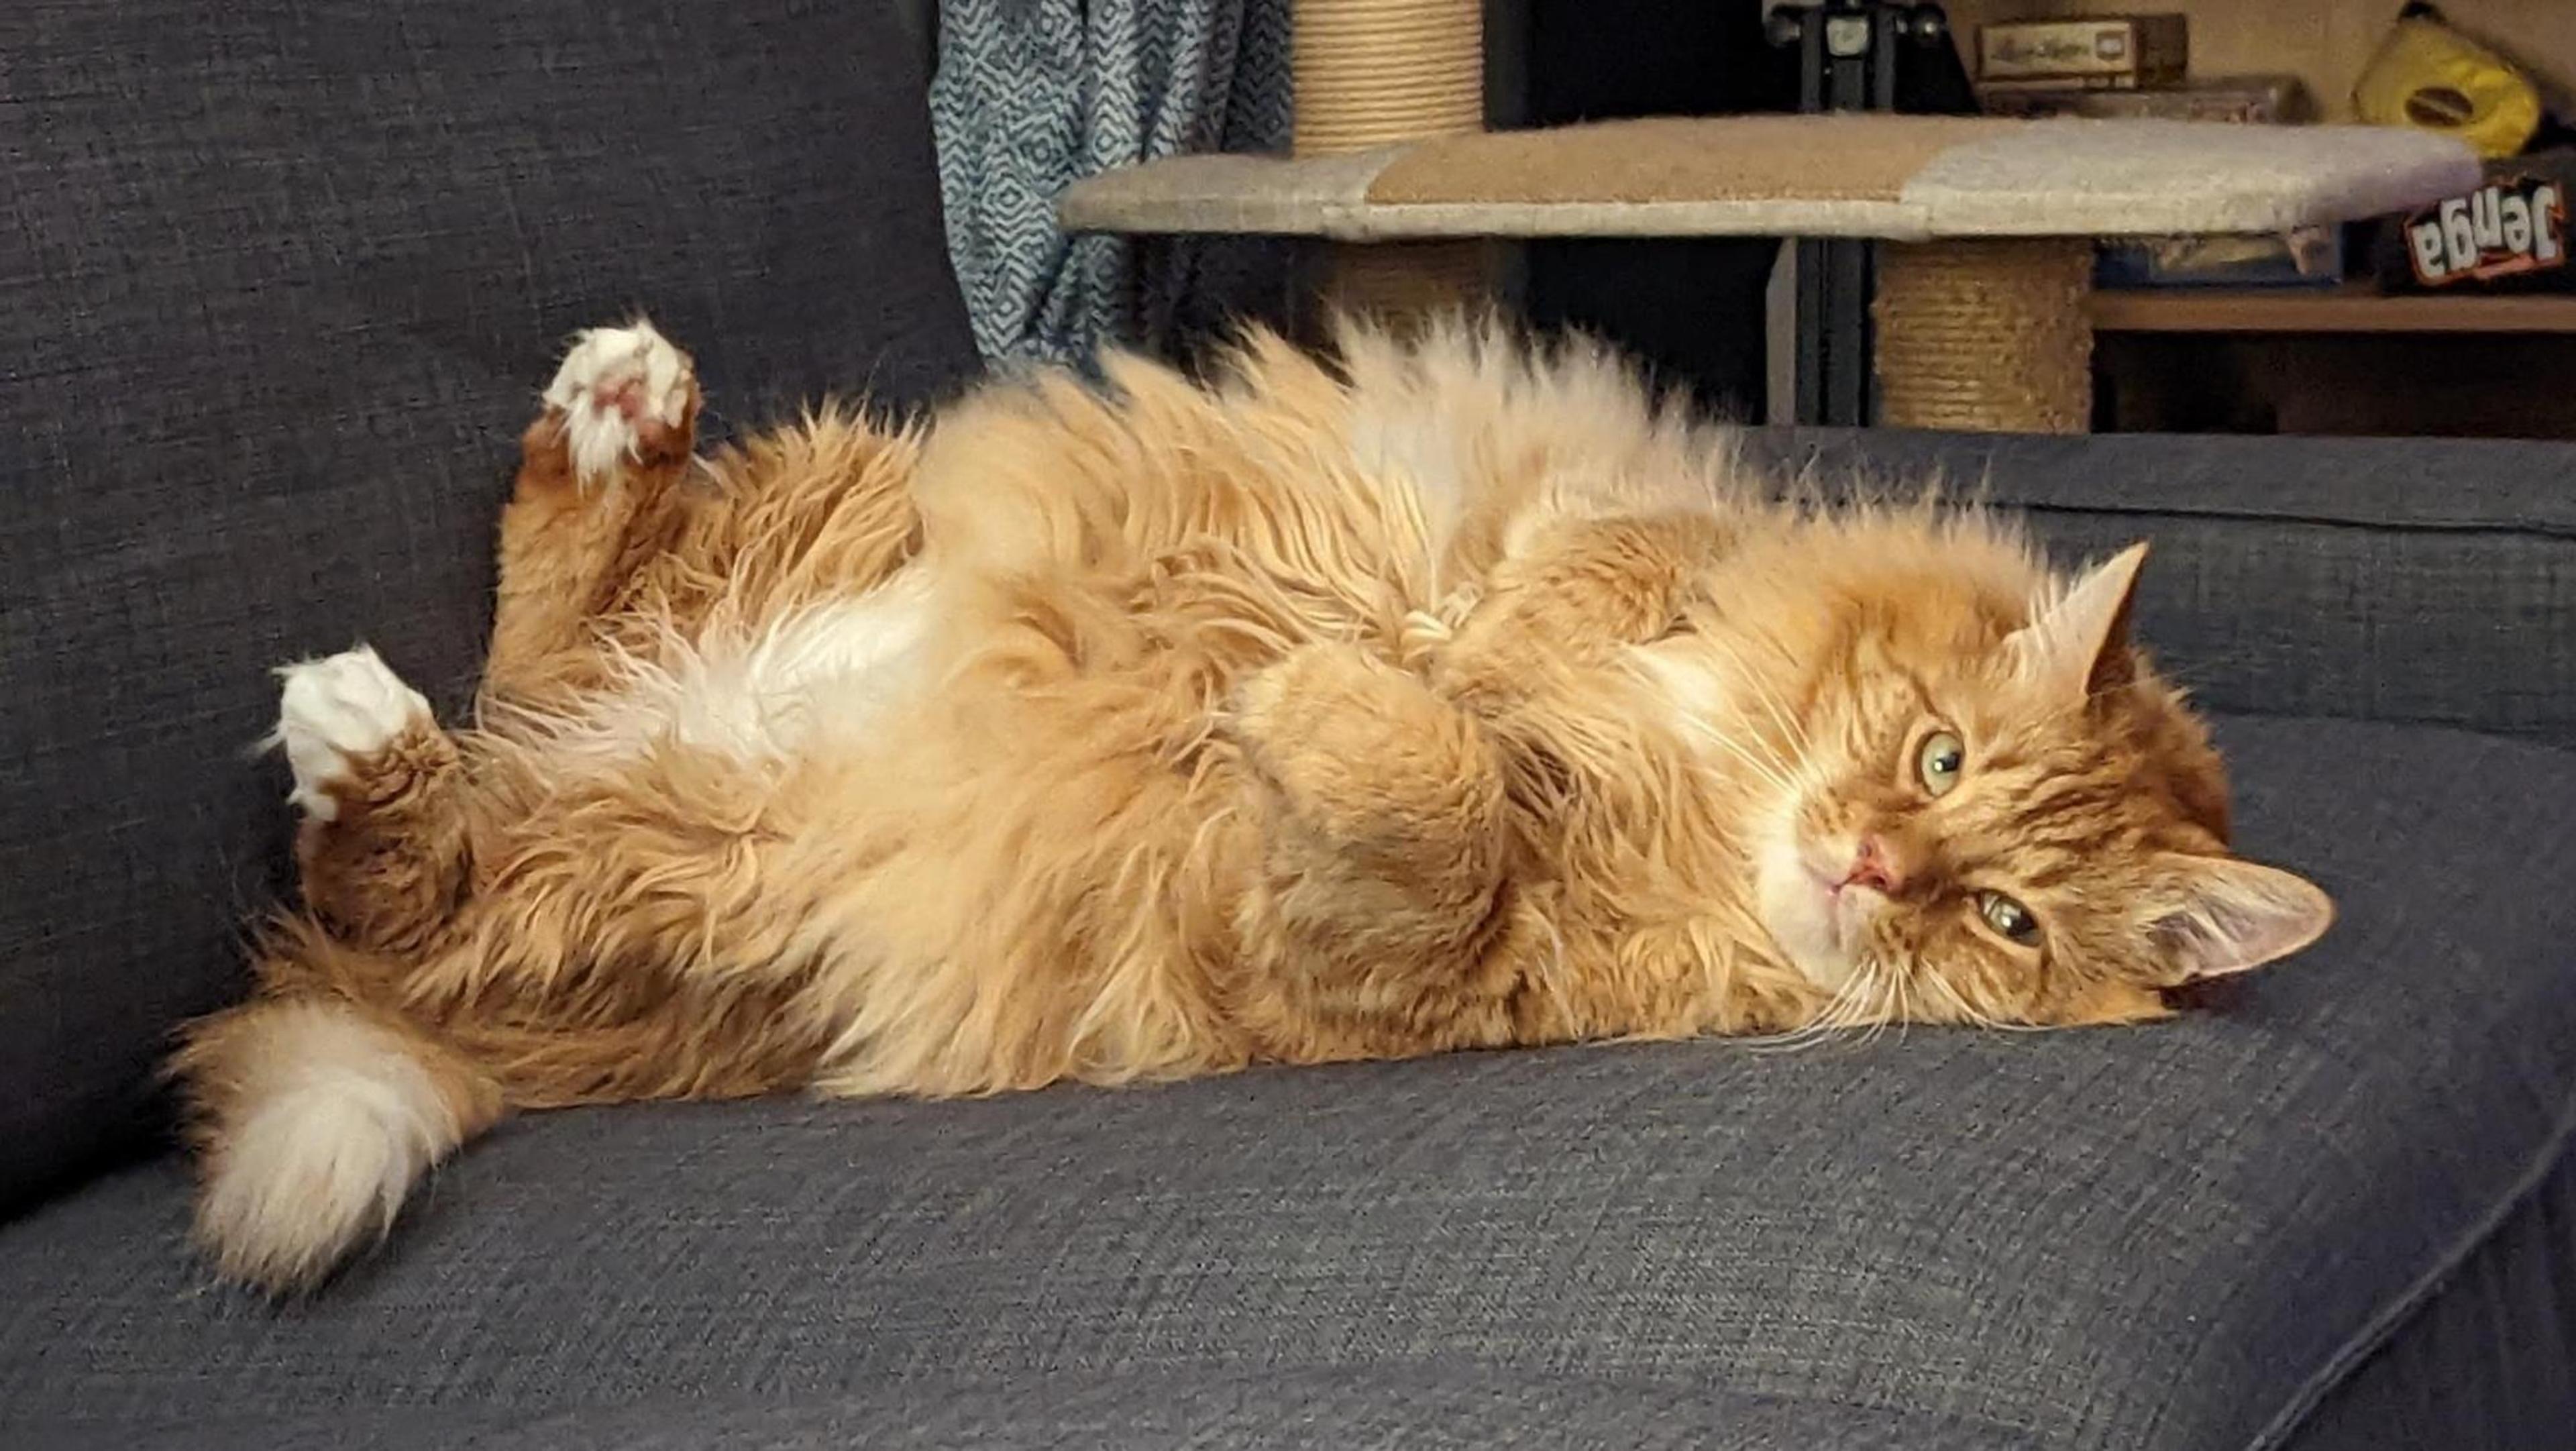 A big, fluffy cat lazily laying on its back on a couch cushion.